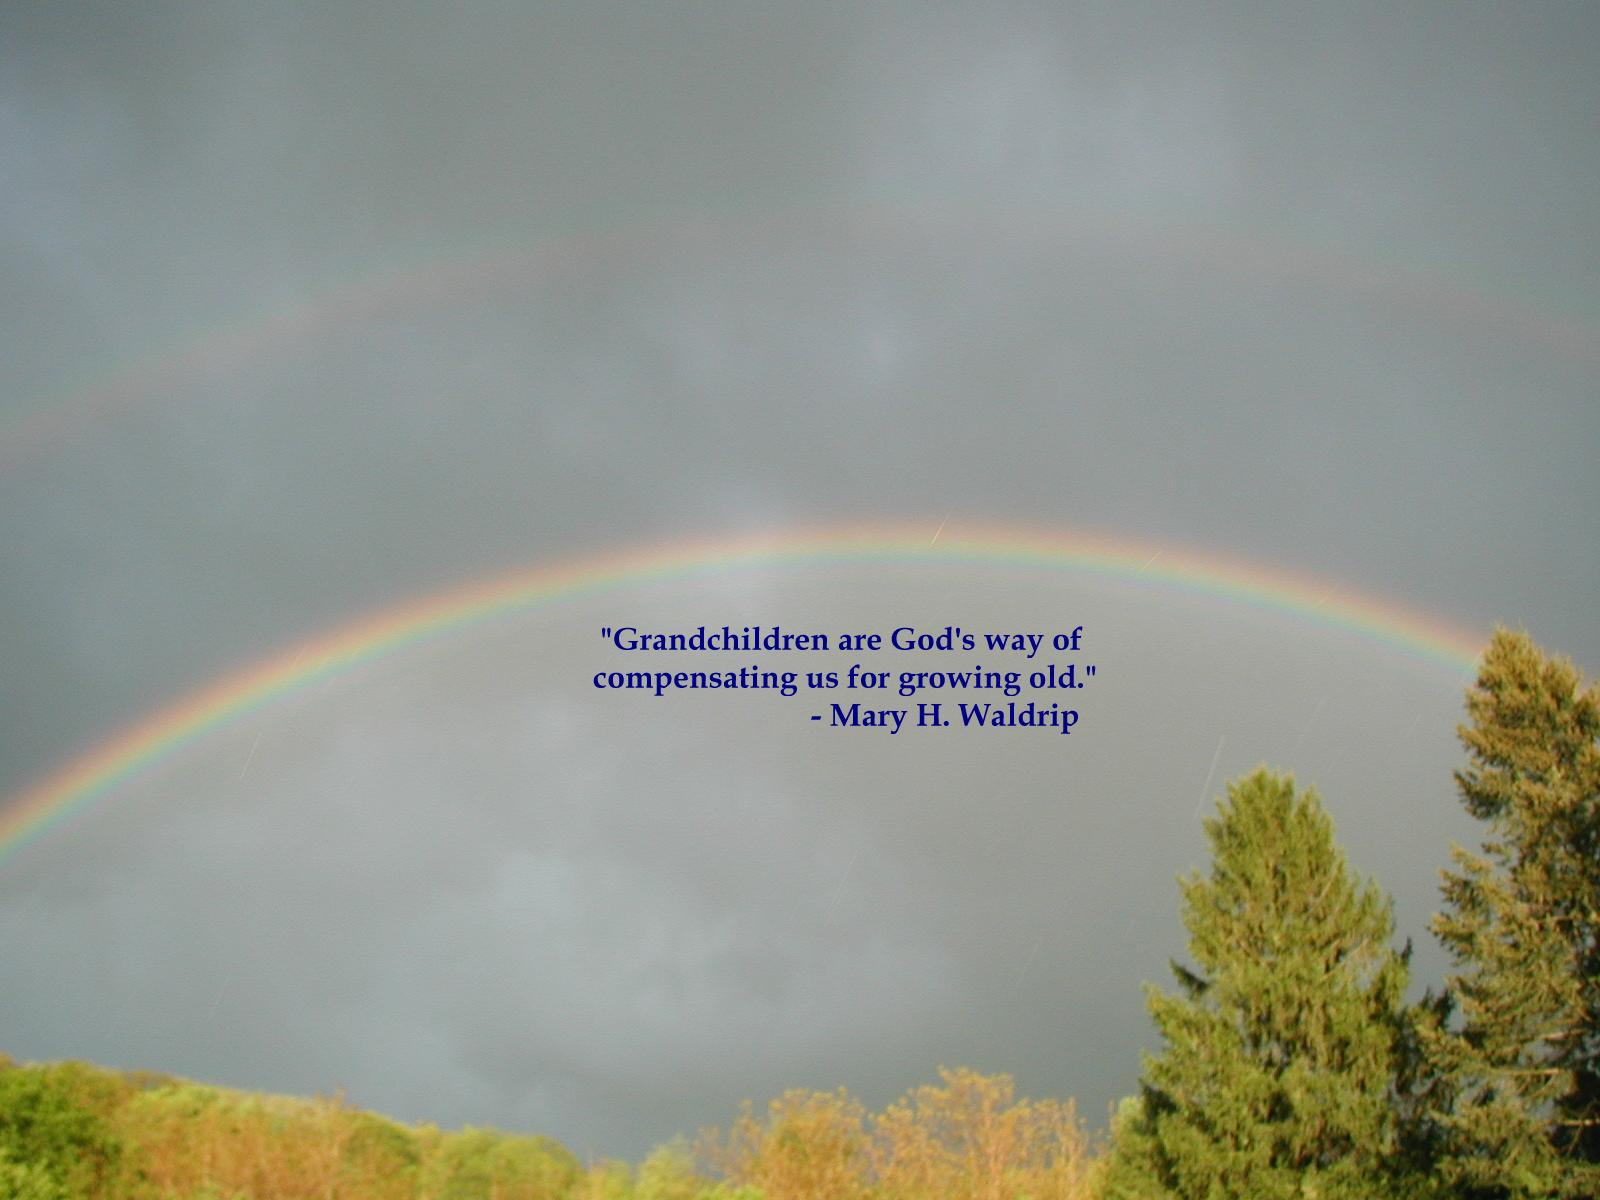 Grandchildren are God's way of compensating us for growing old.- Mary H. Waldrip displayed at 500x375